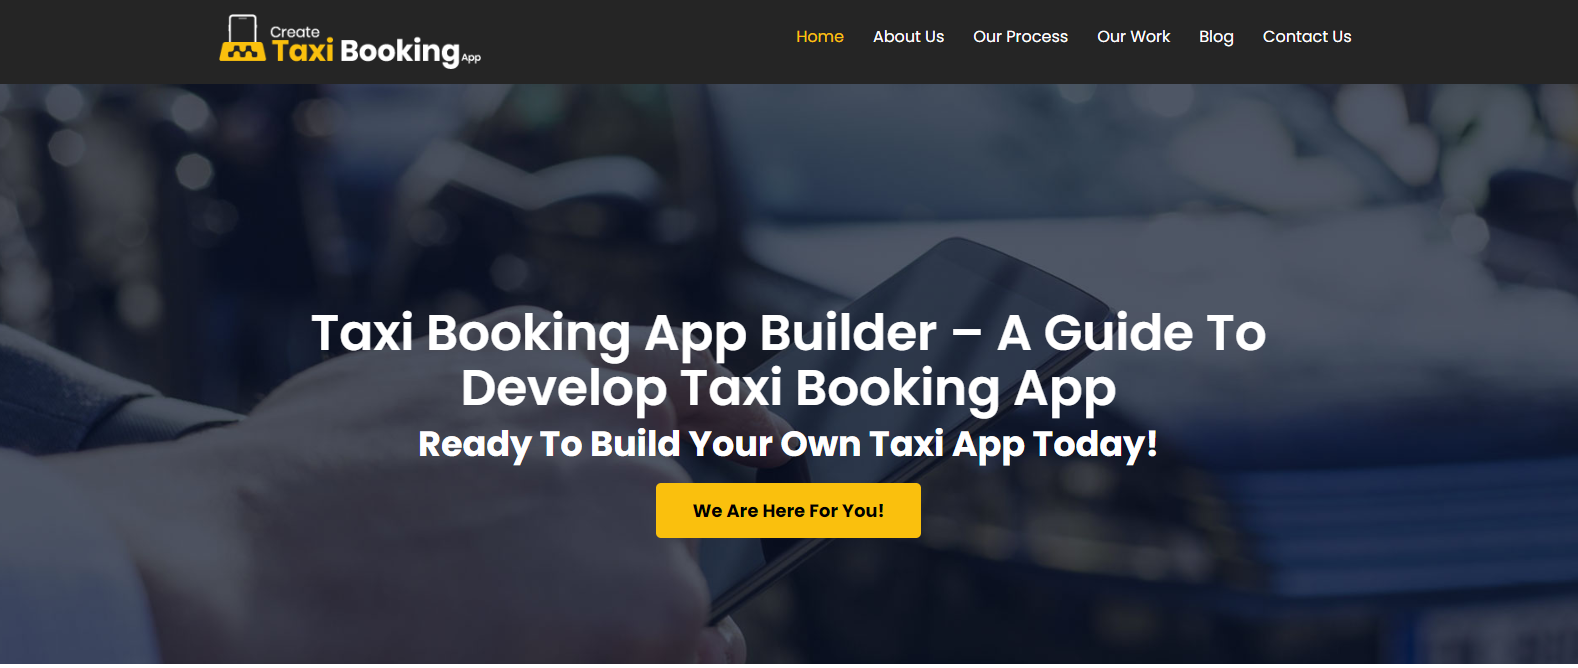 Create Taxi Booking App 